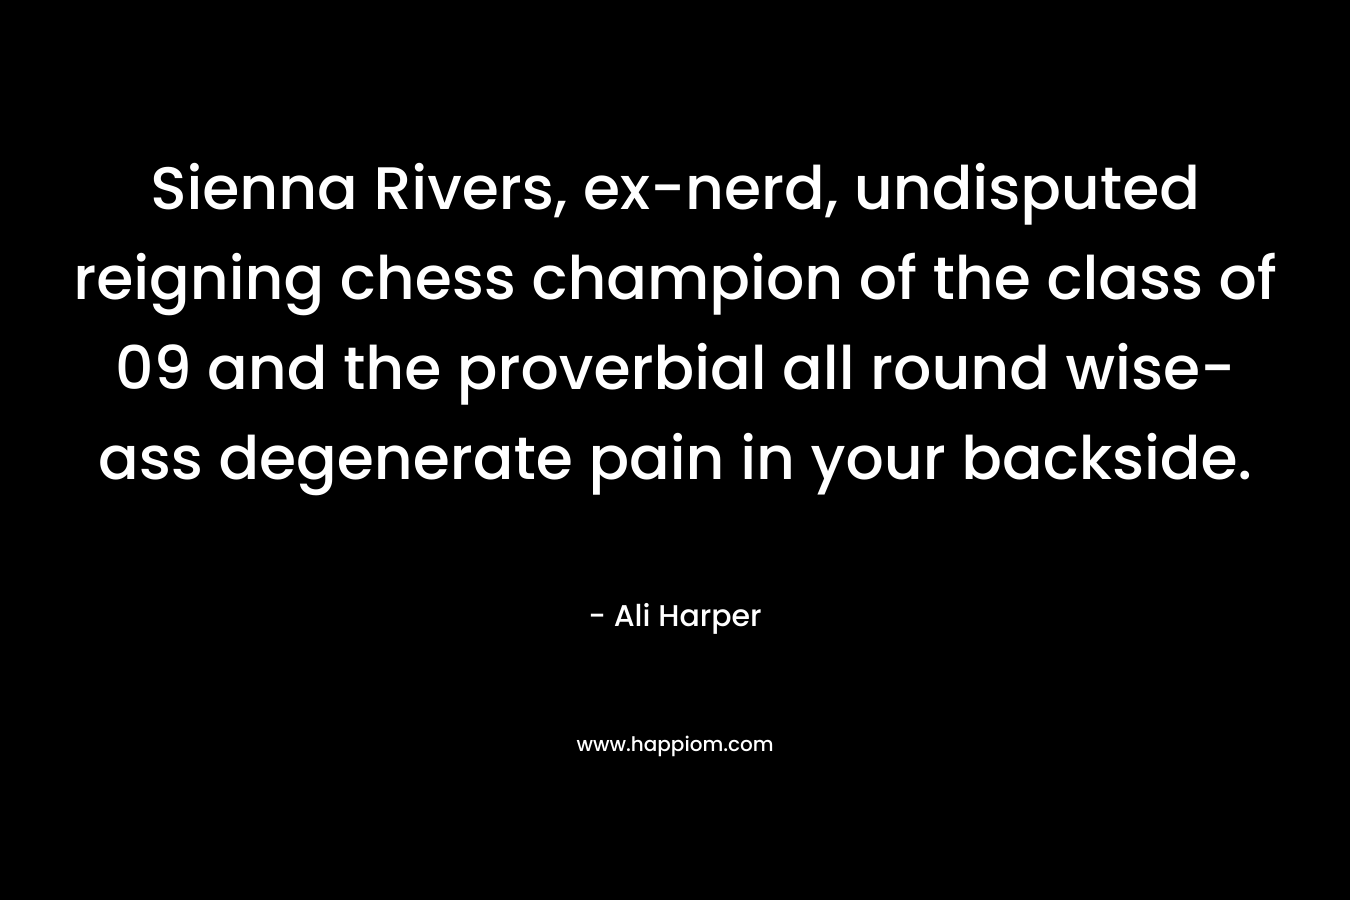 Sienna Rivers, ex-nerd, undisputed reigning chess champion of the class of 09 and the proverbial all round wise-ass degenerate pain in your backside.